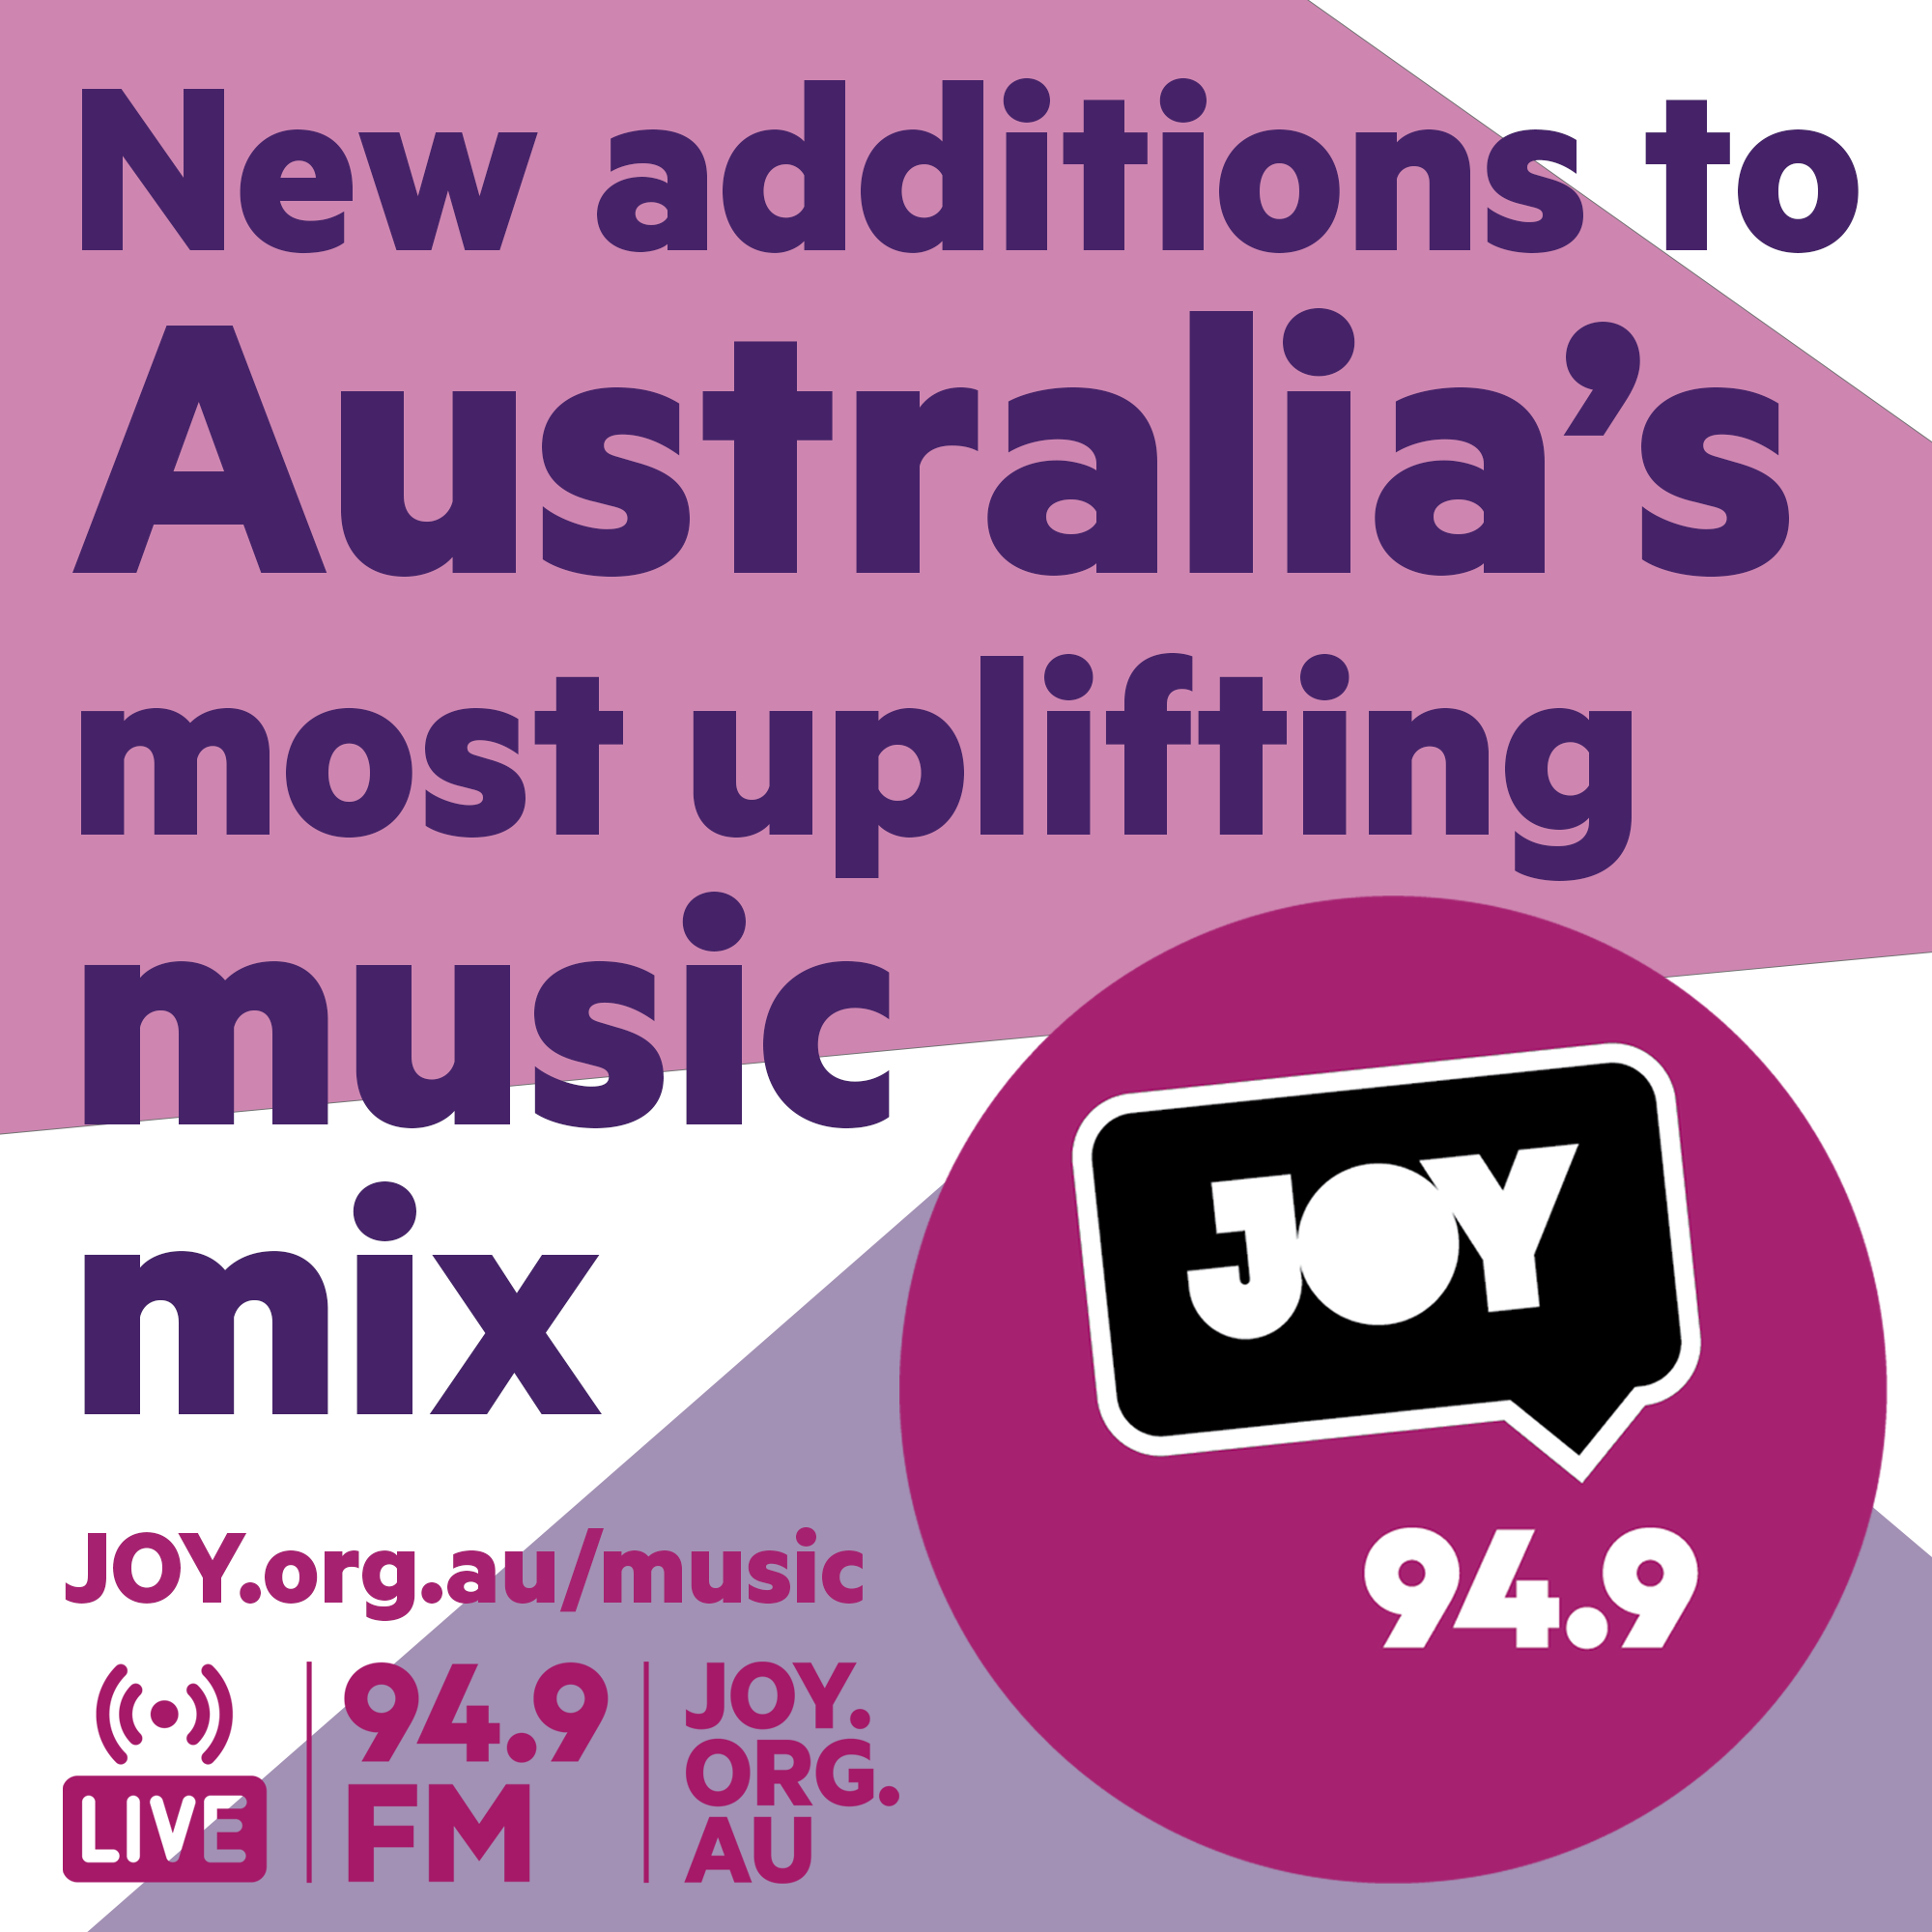 The newest songs to Australia’s most uplifting music mix: 16 March 2022